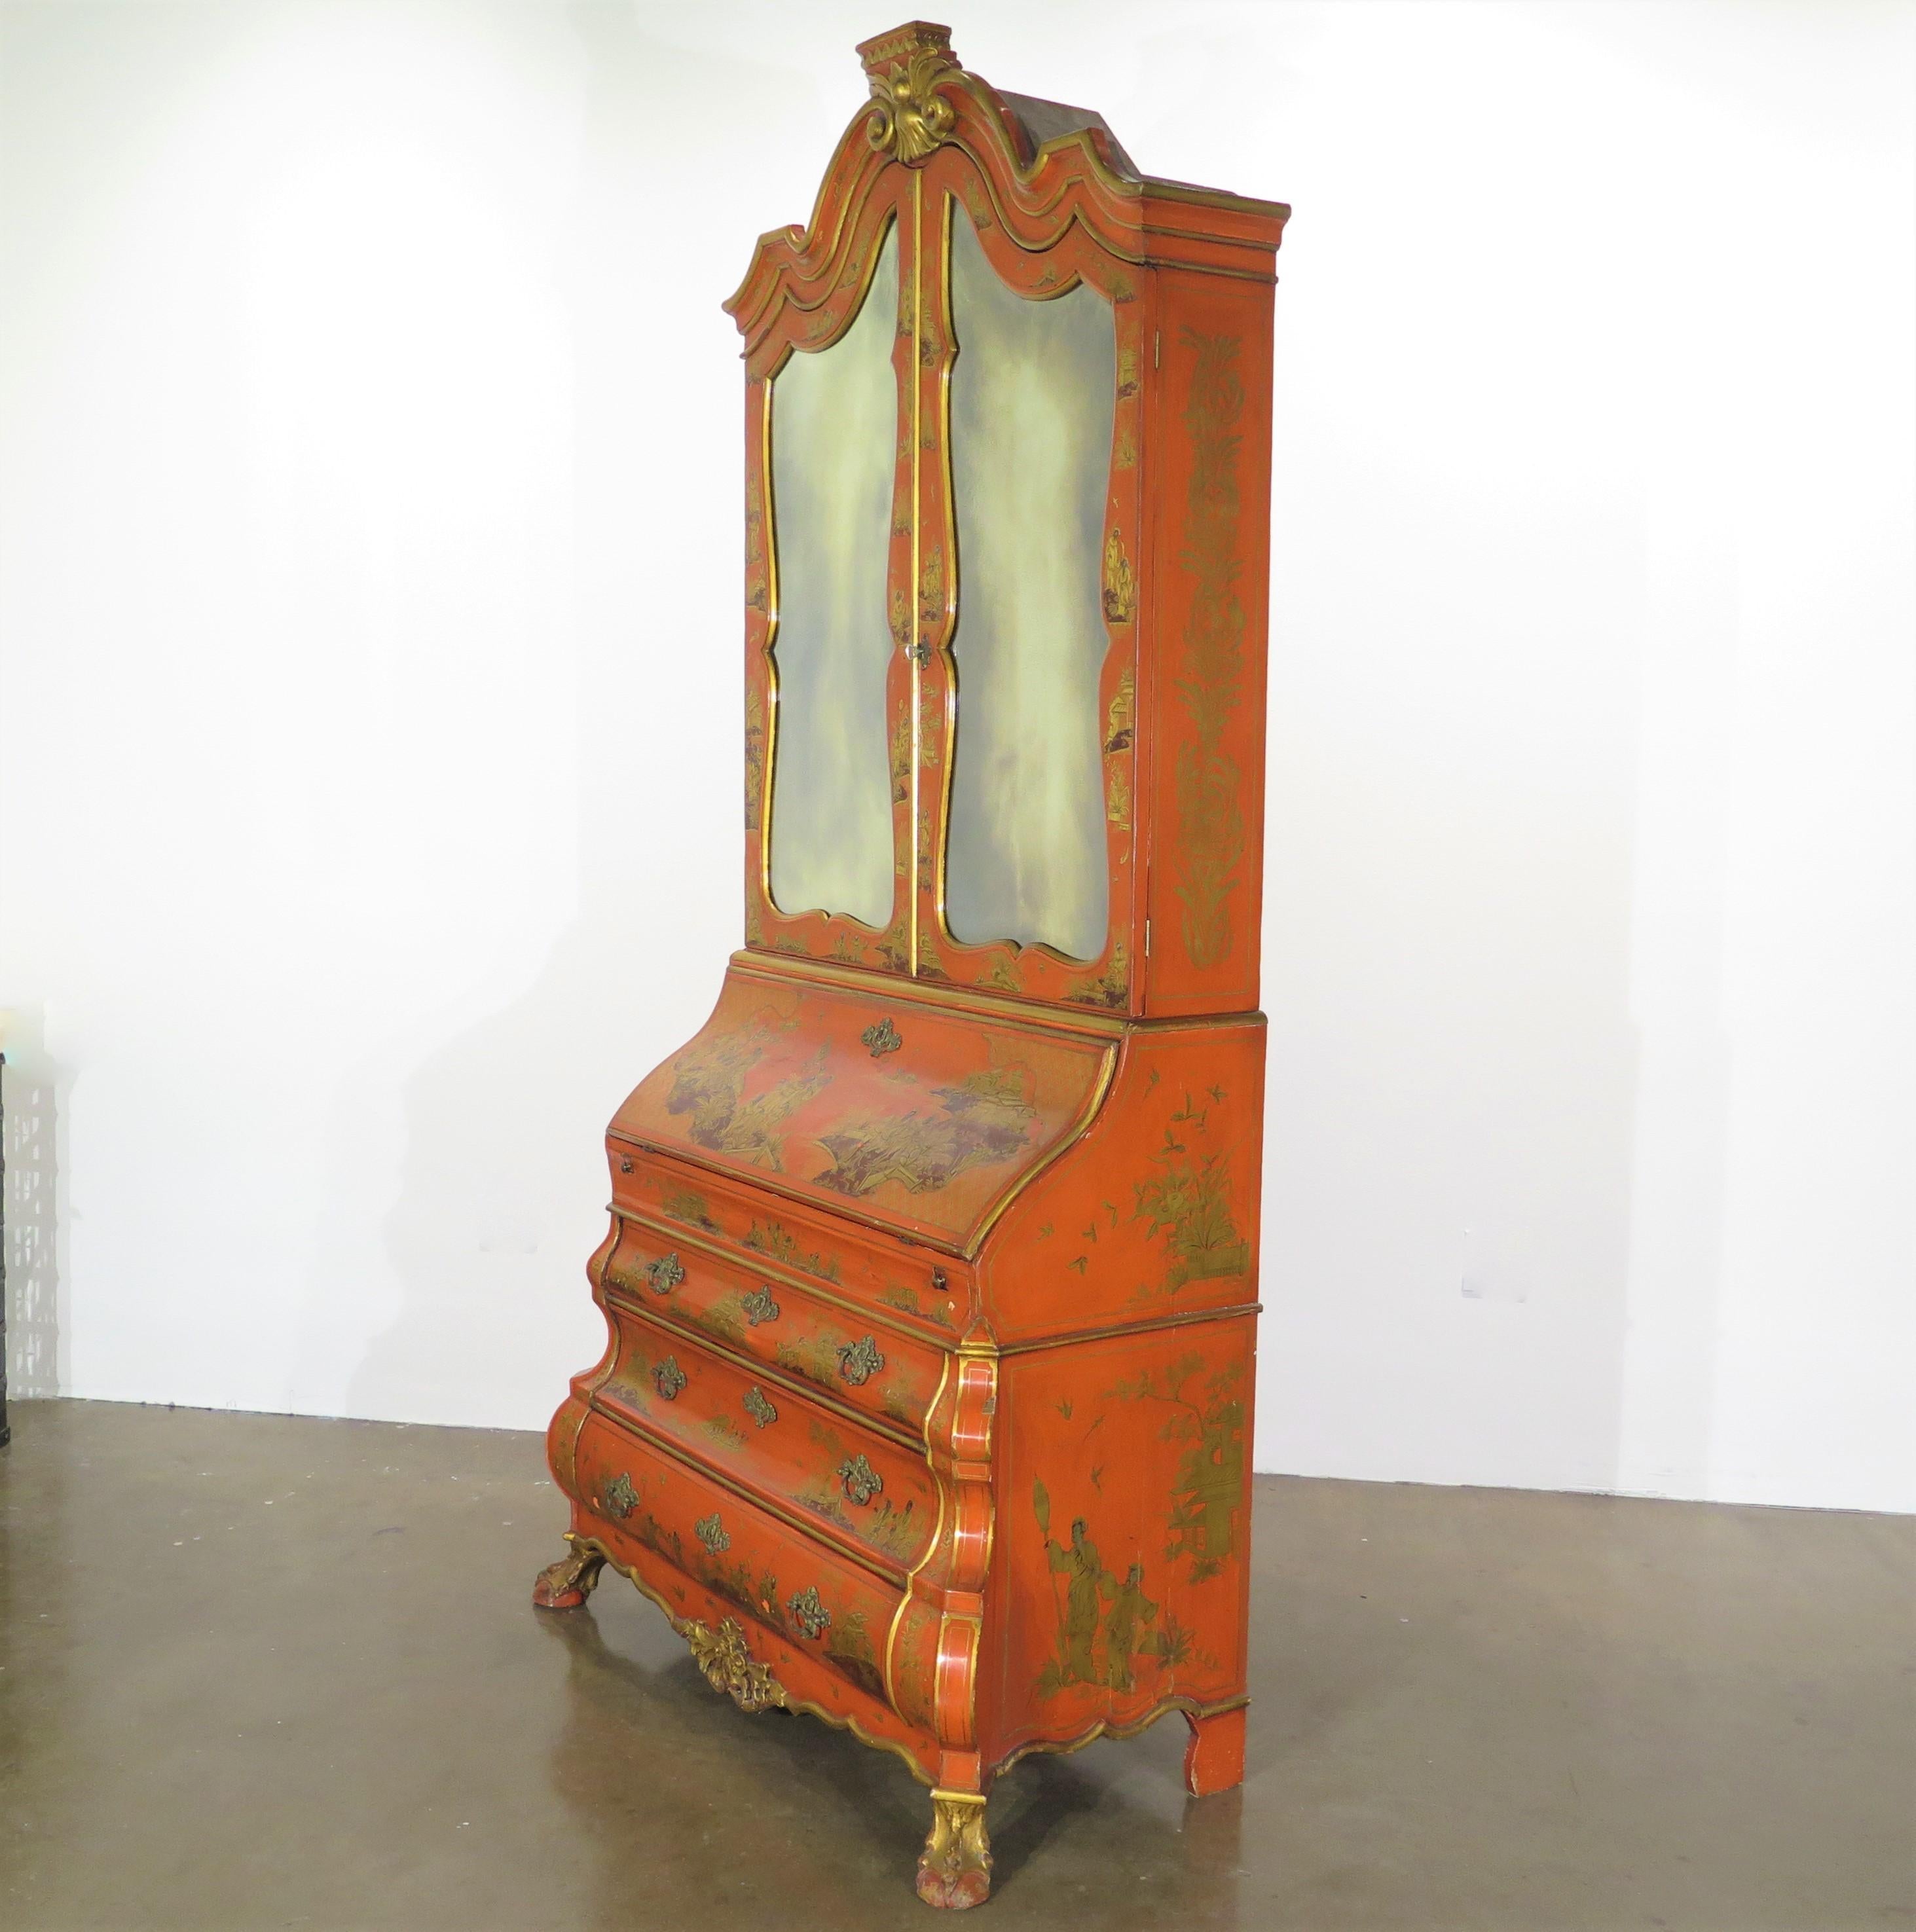 a Queen Anne-style Chinese red (vermillion) chinoiserie secretary / desk and bookcase with all over gilt decoration, a drop-front desk / writing surface, a scroll bonnet top / pediment, raised on 